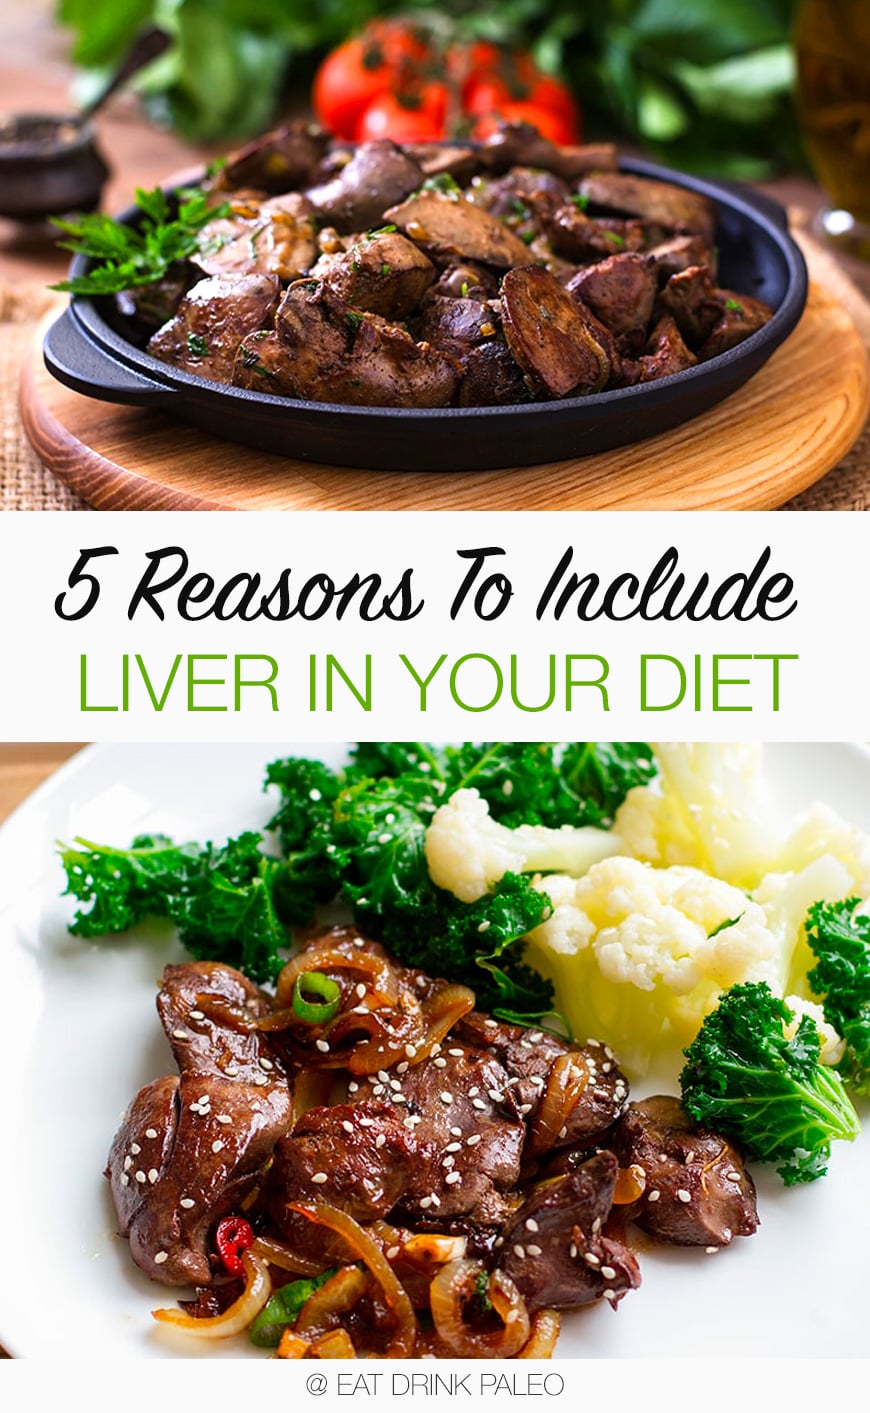 5 Reasons To include Liver In Your Diet | We talk about liver nutrition, what types of liver to eat, and how to supplement